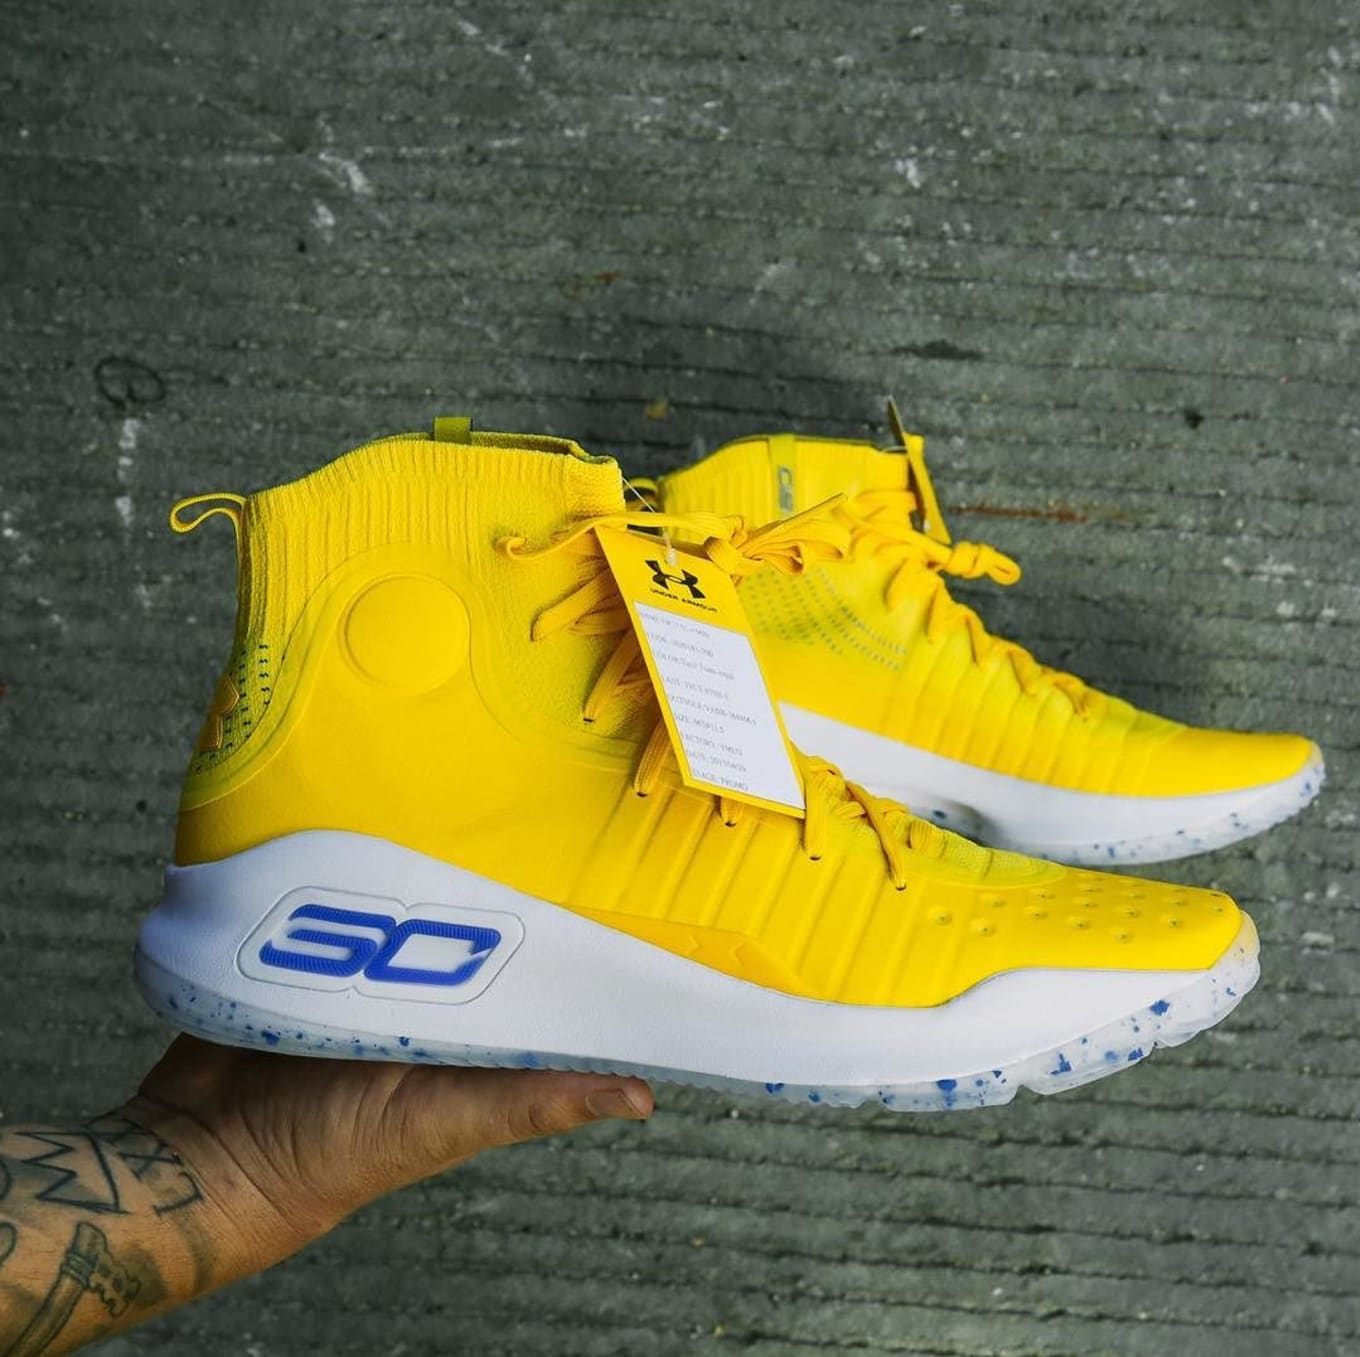 curry 4 yellow blue